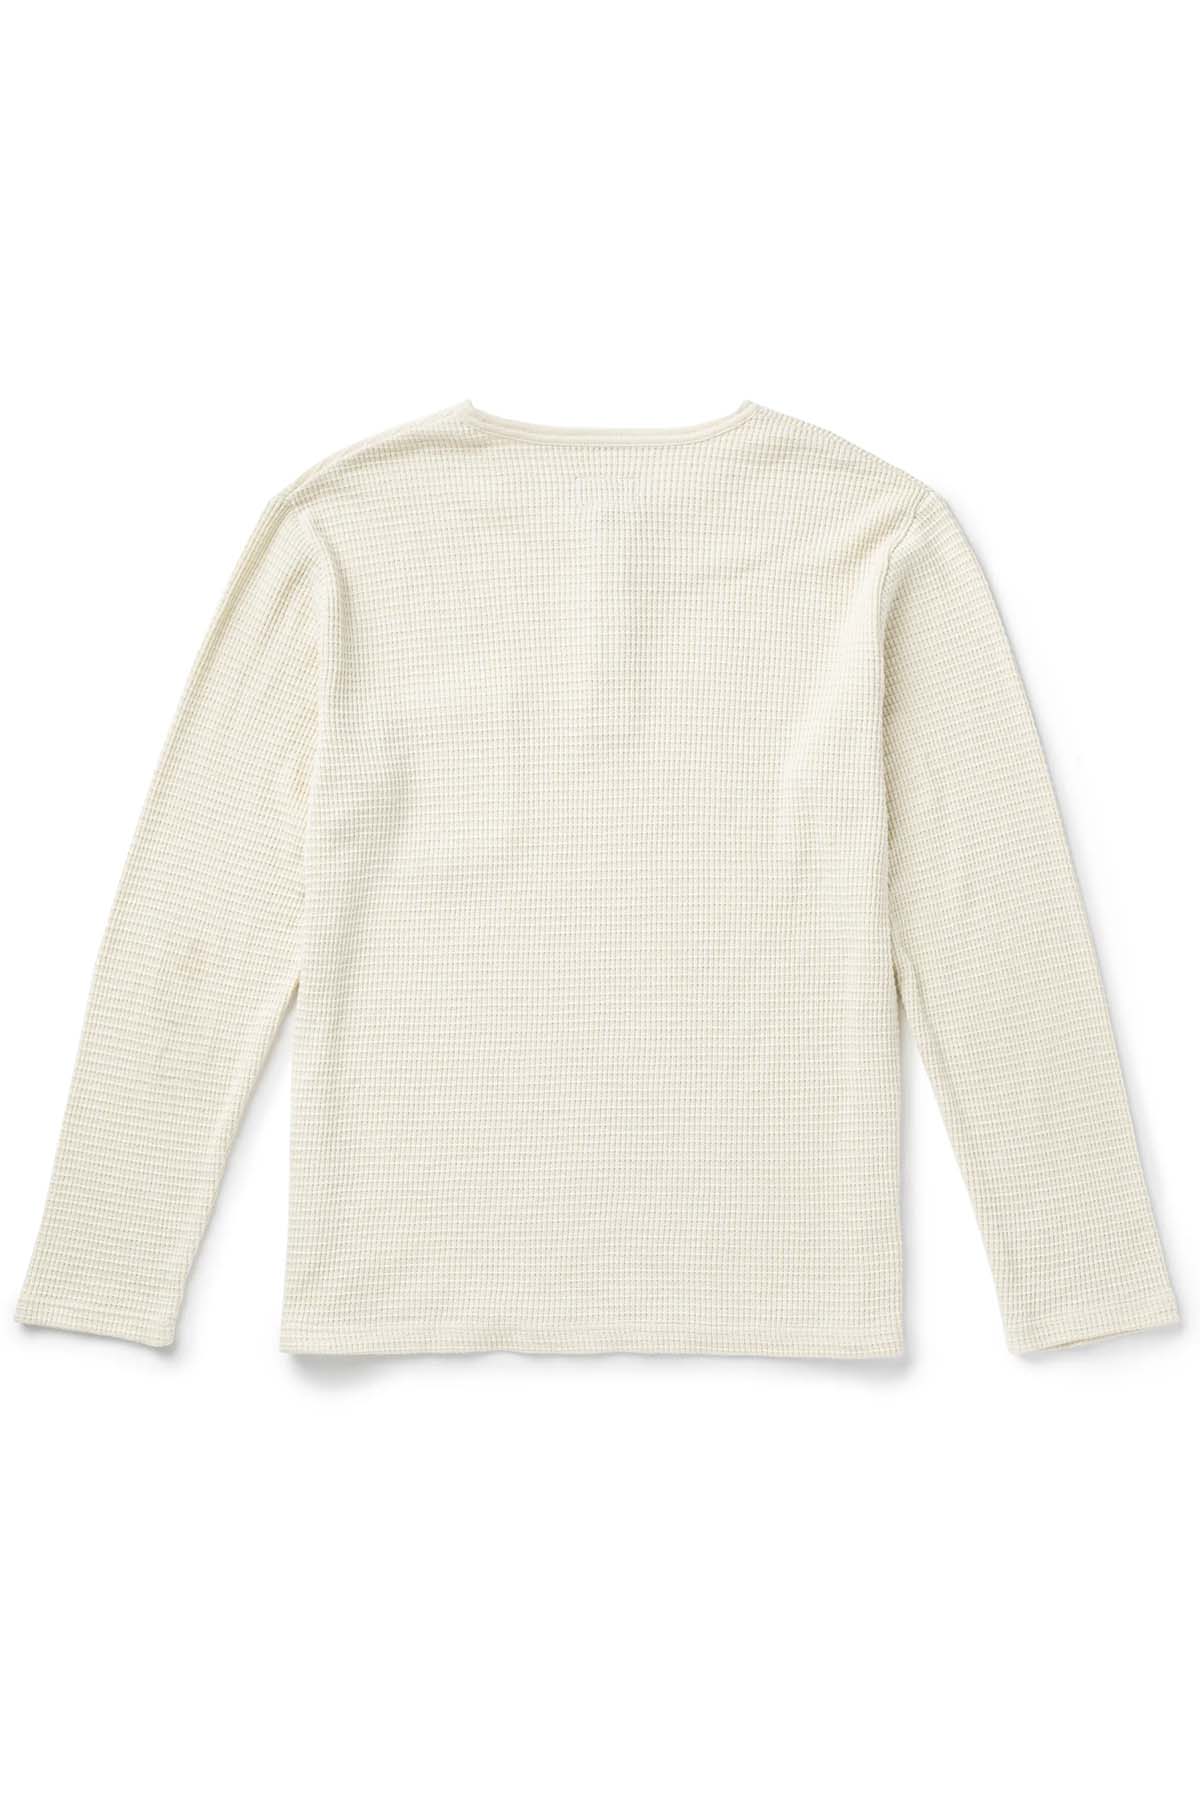 SAWPIT HENLEY LS THERMAL